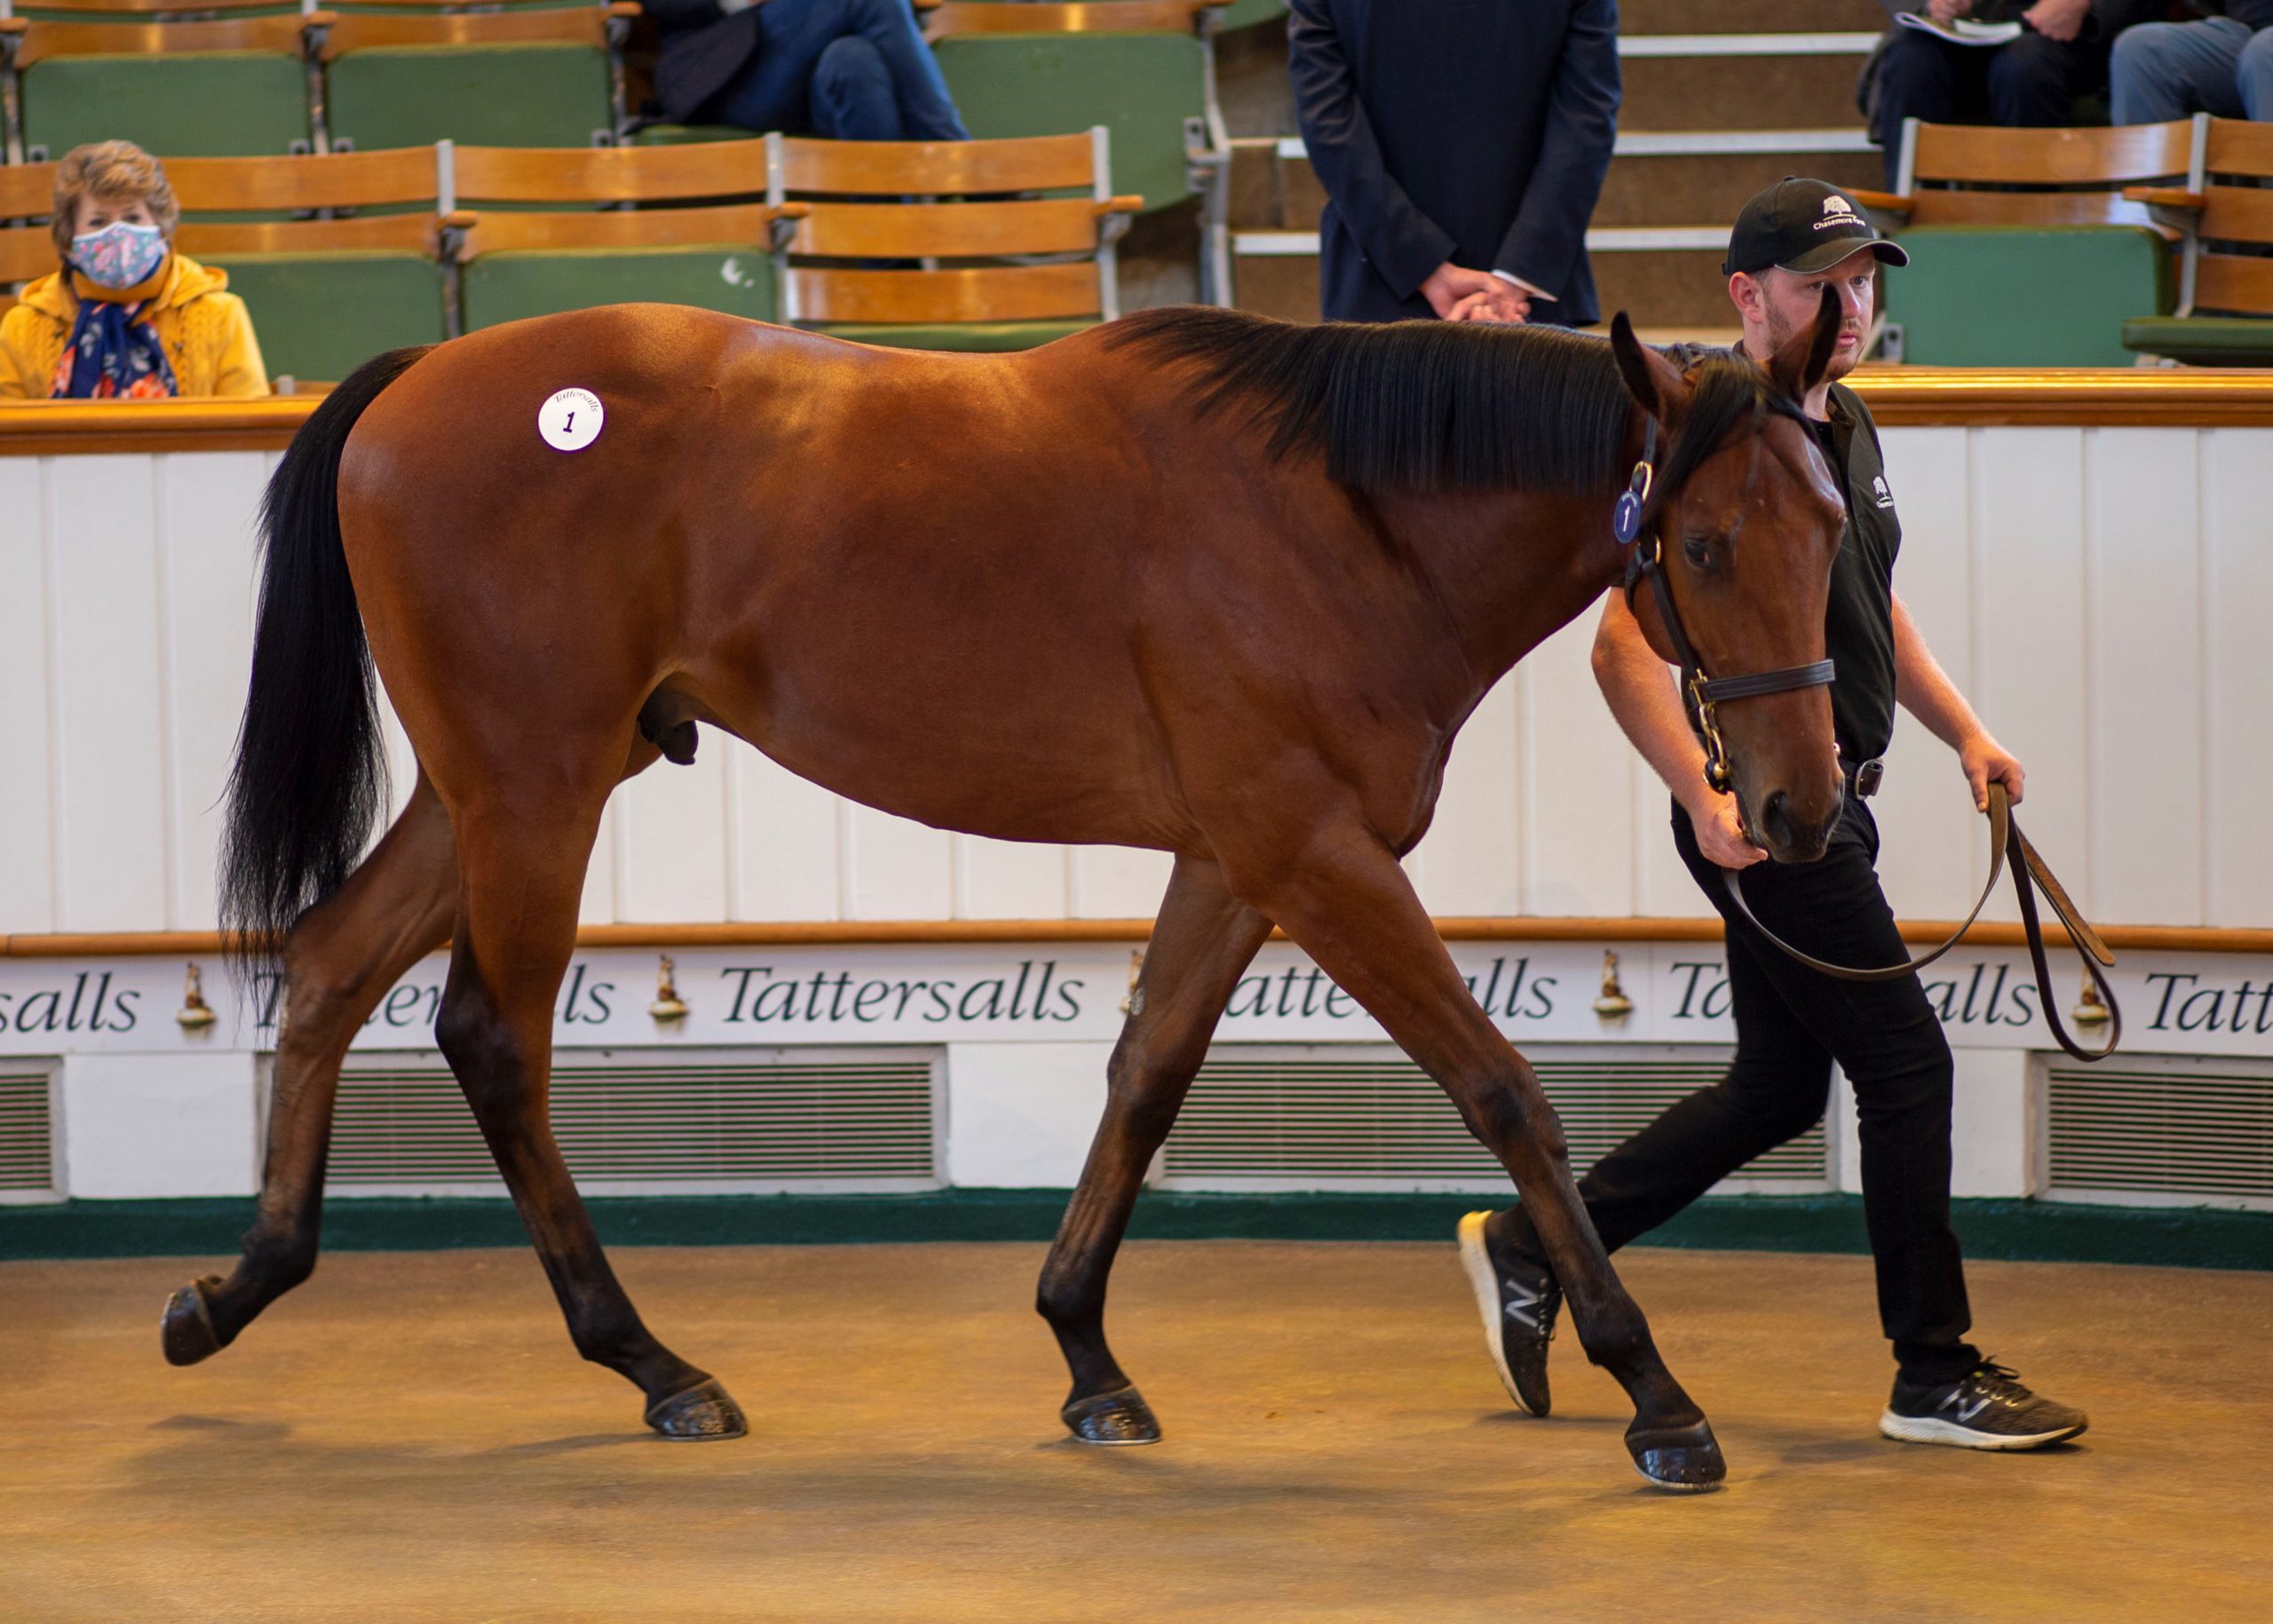 A strong opening day for Tattersalls Book 1 Stallions